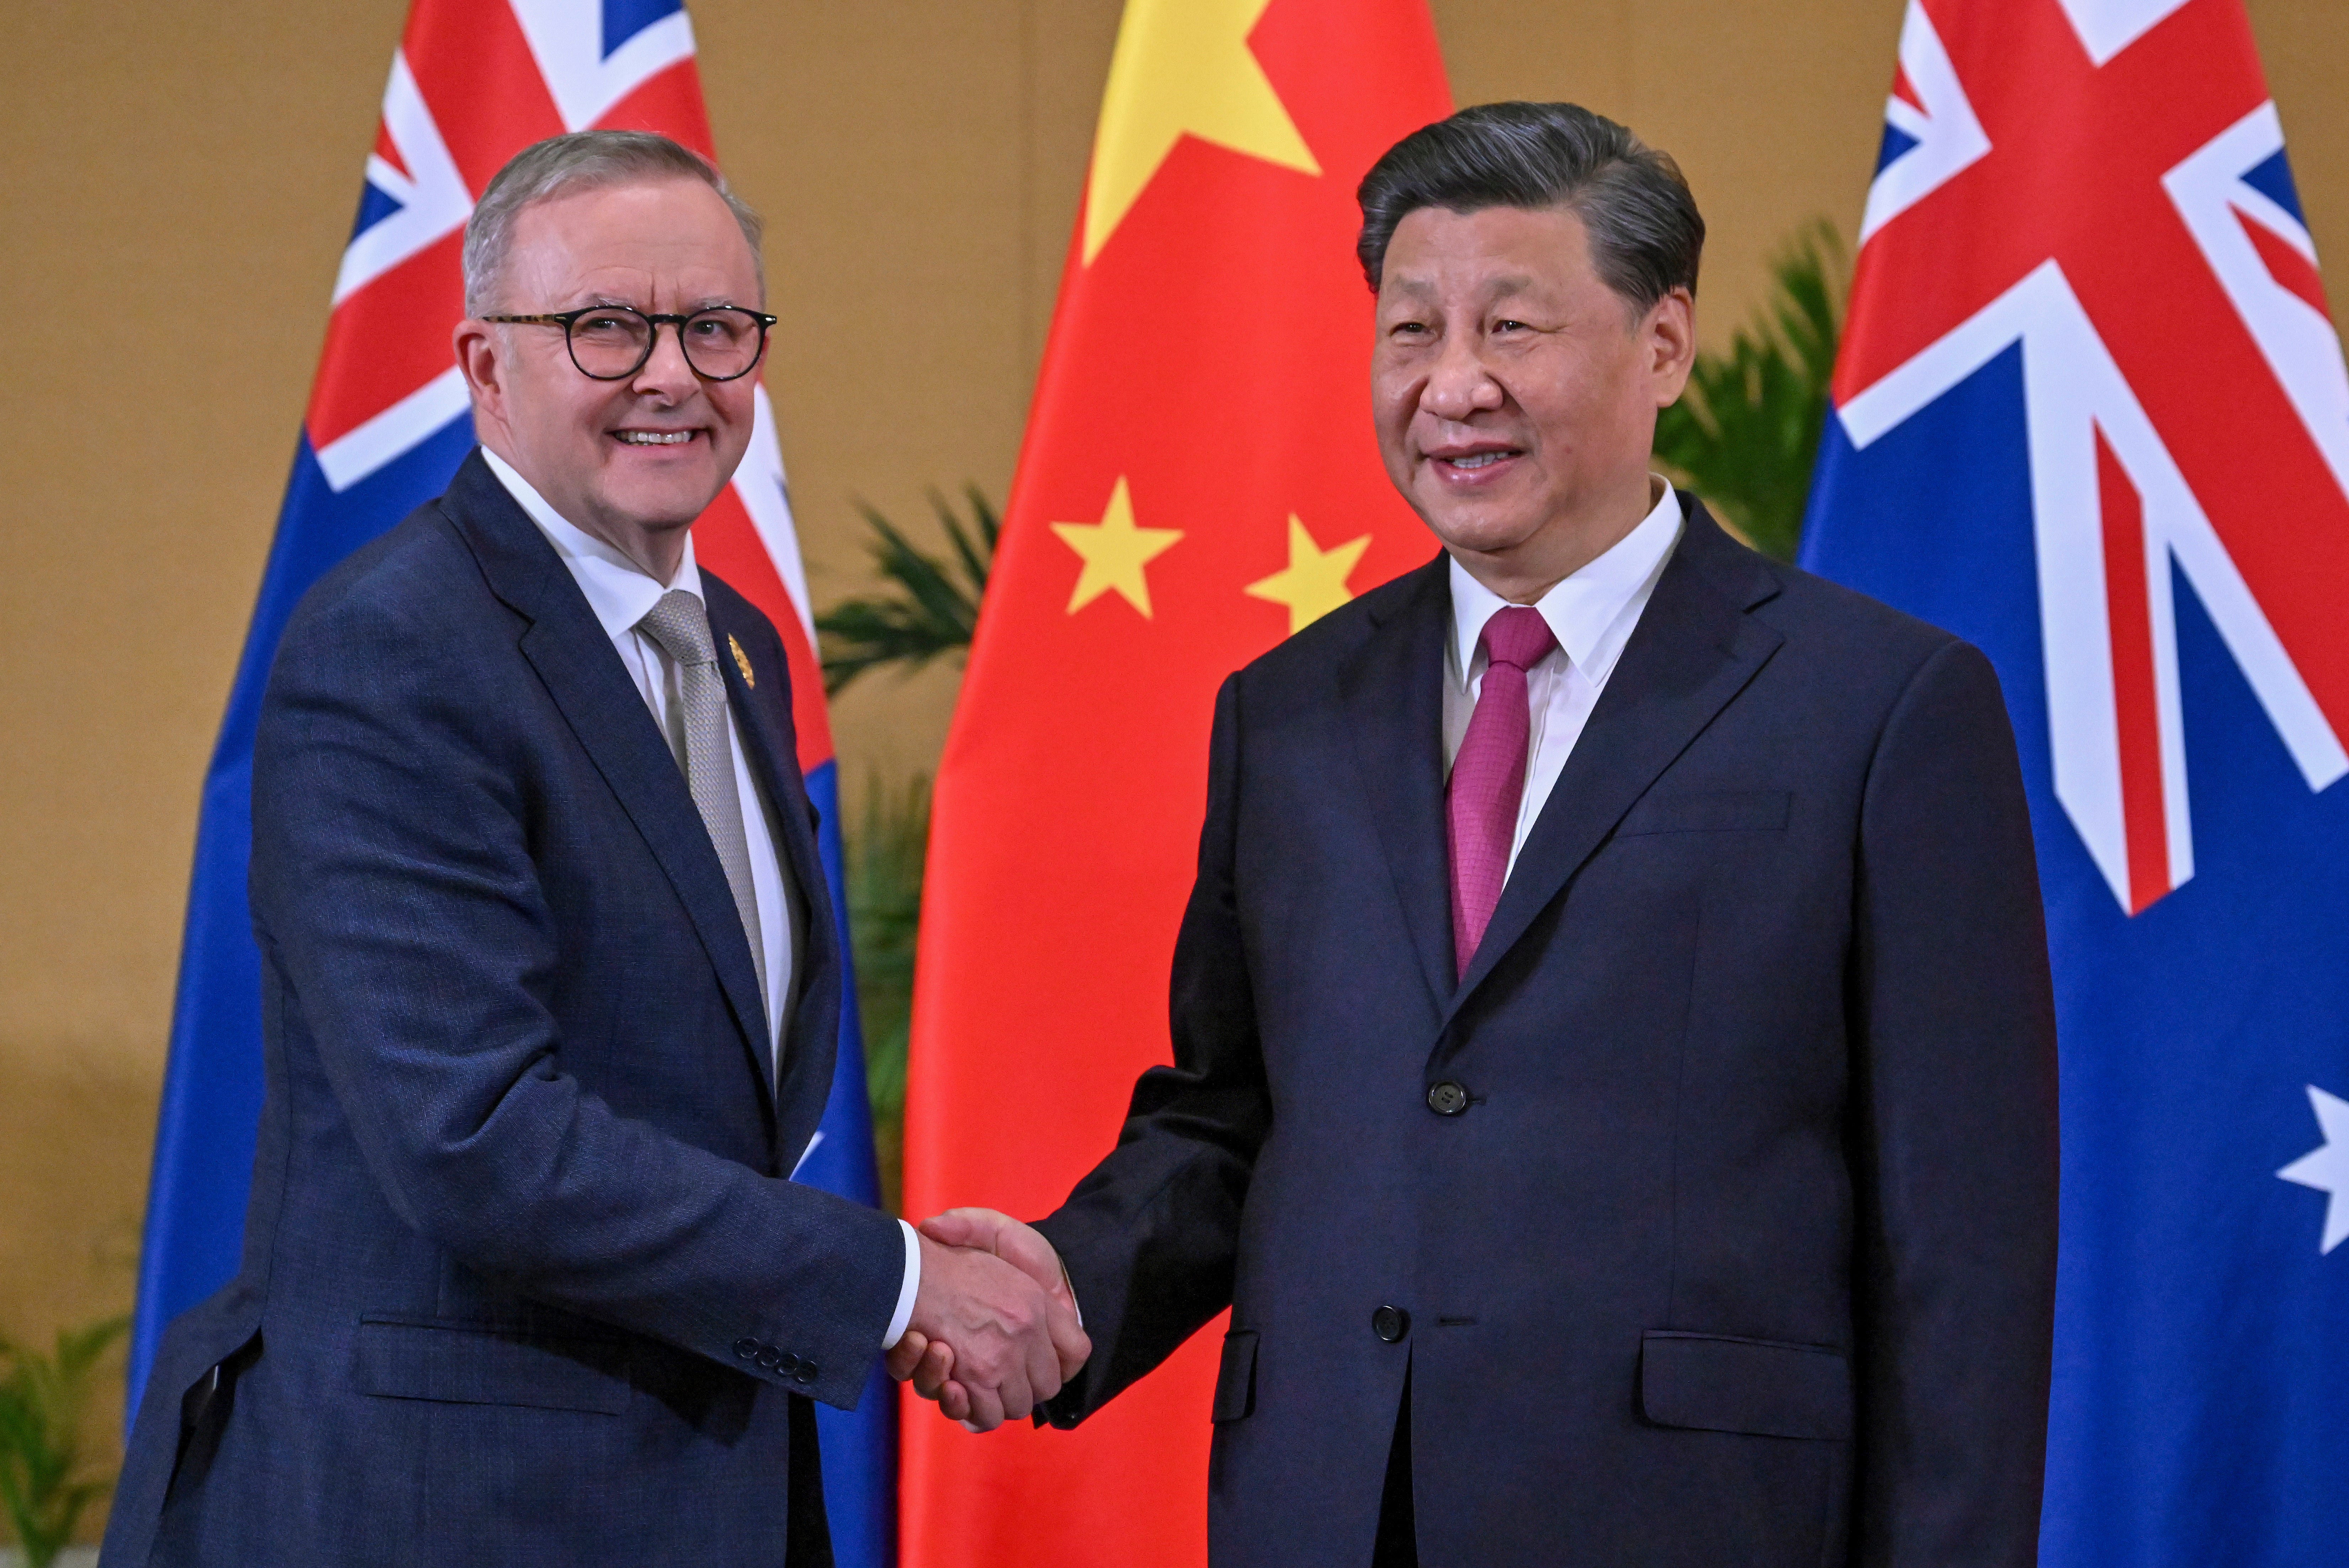 Anthony Albanese met Chinese leader Xi Jingping at the G20 last year